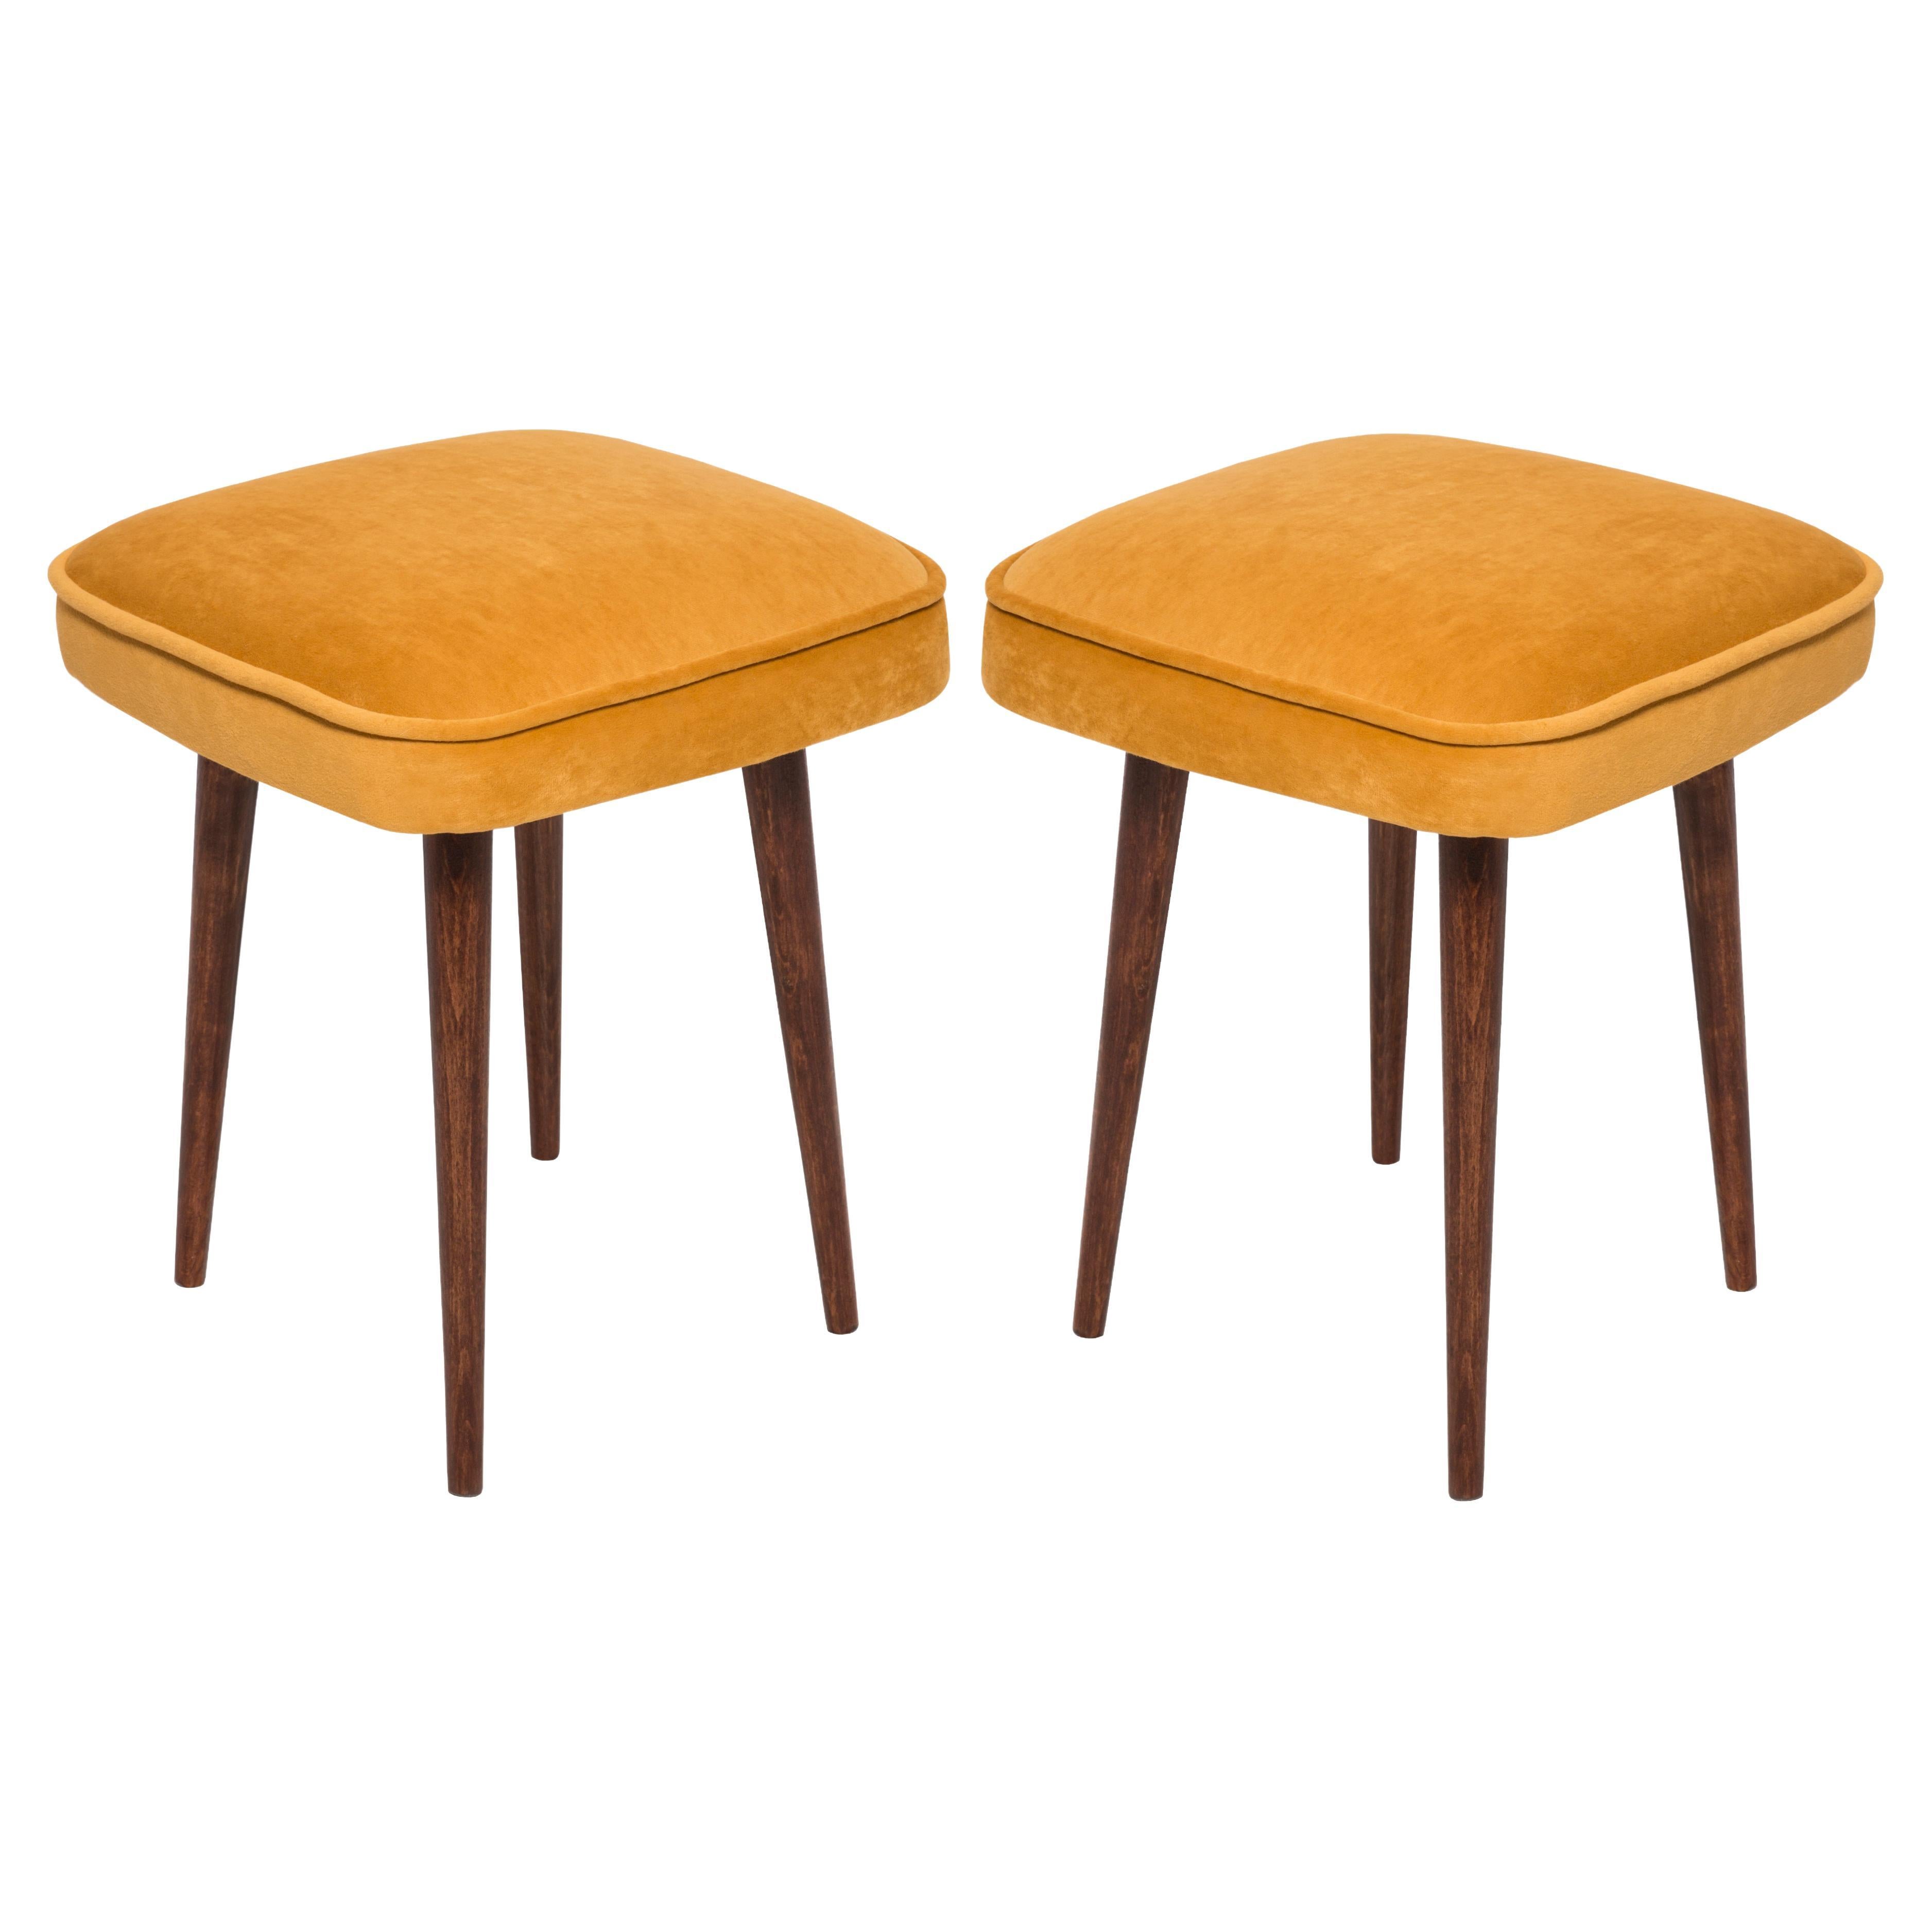 Set of Two Mustard Yellow Stools, Europe, 1960s